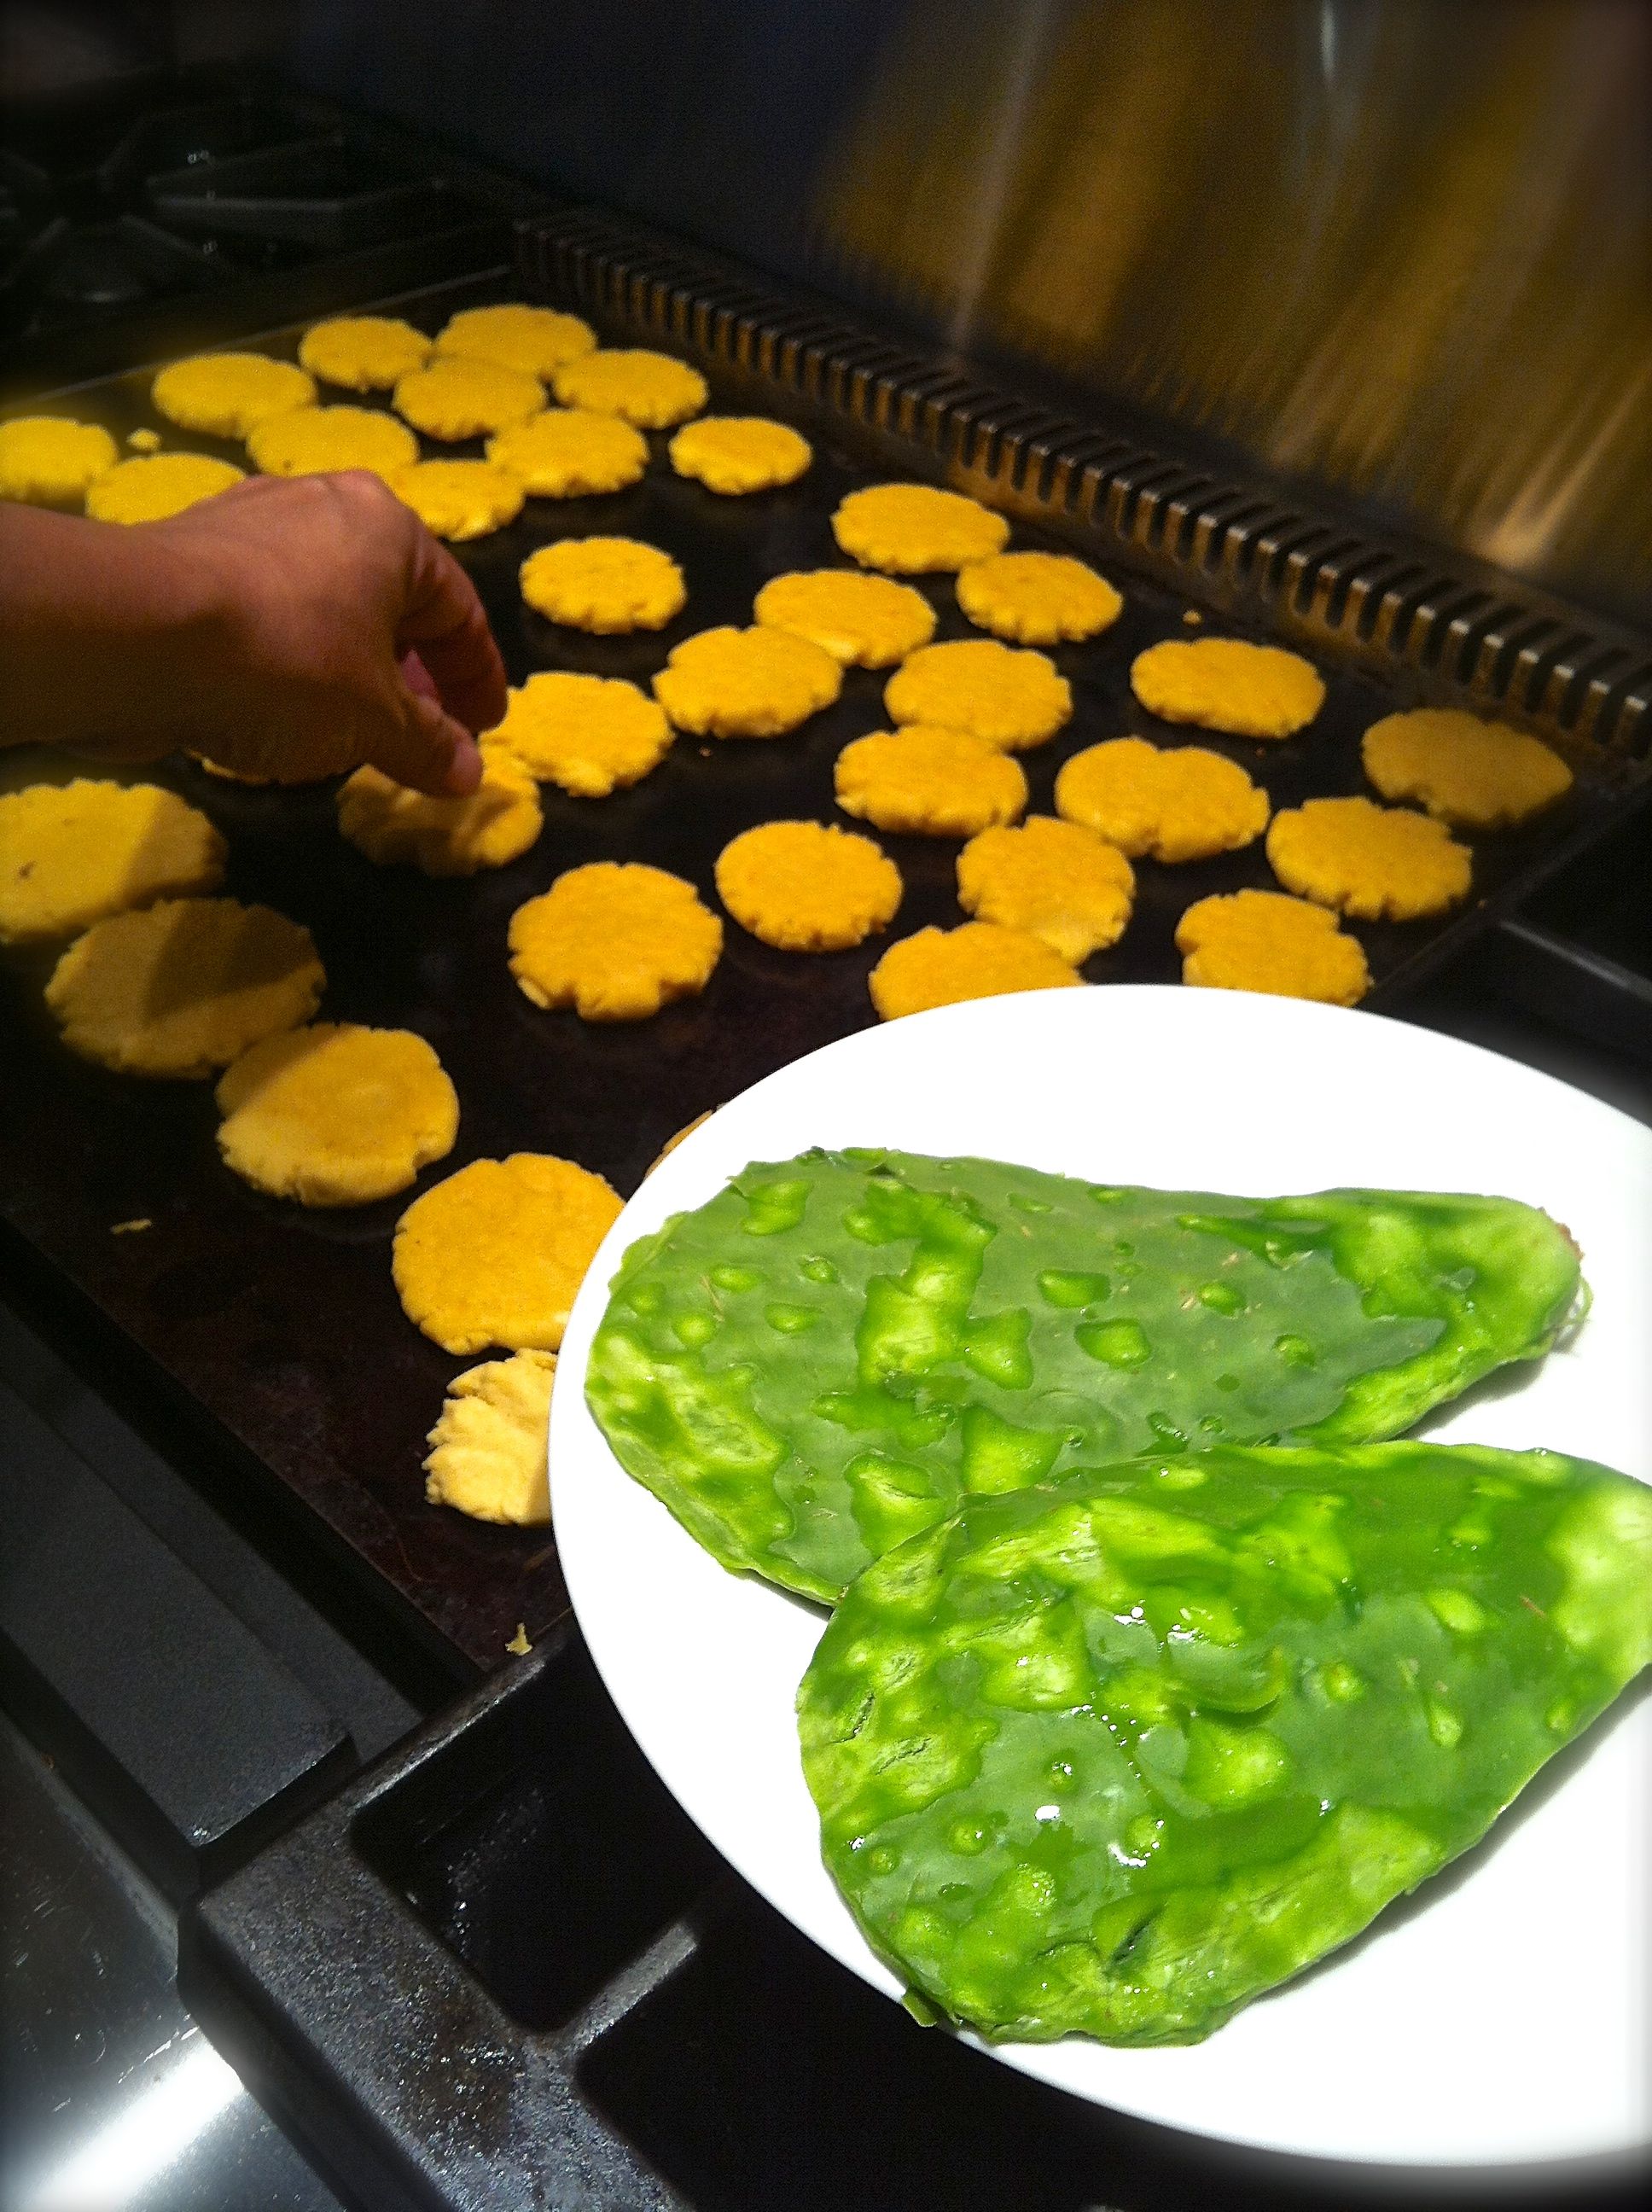 Texas Mexican cooking traditional gorditas with cactus